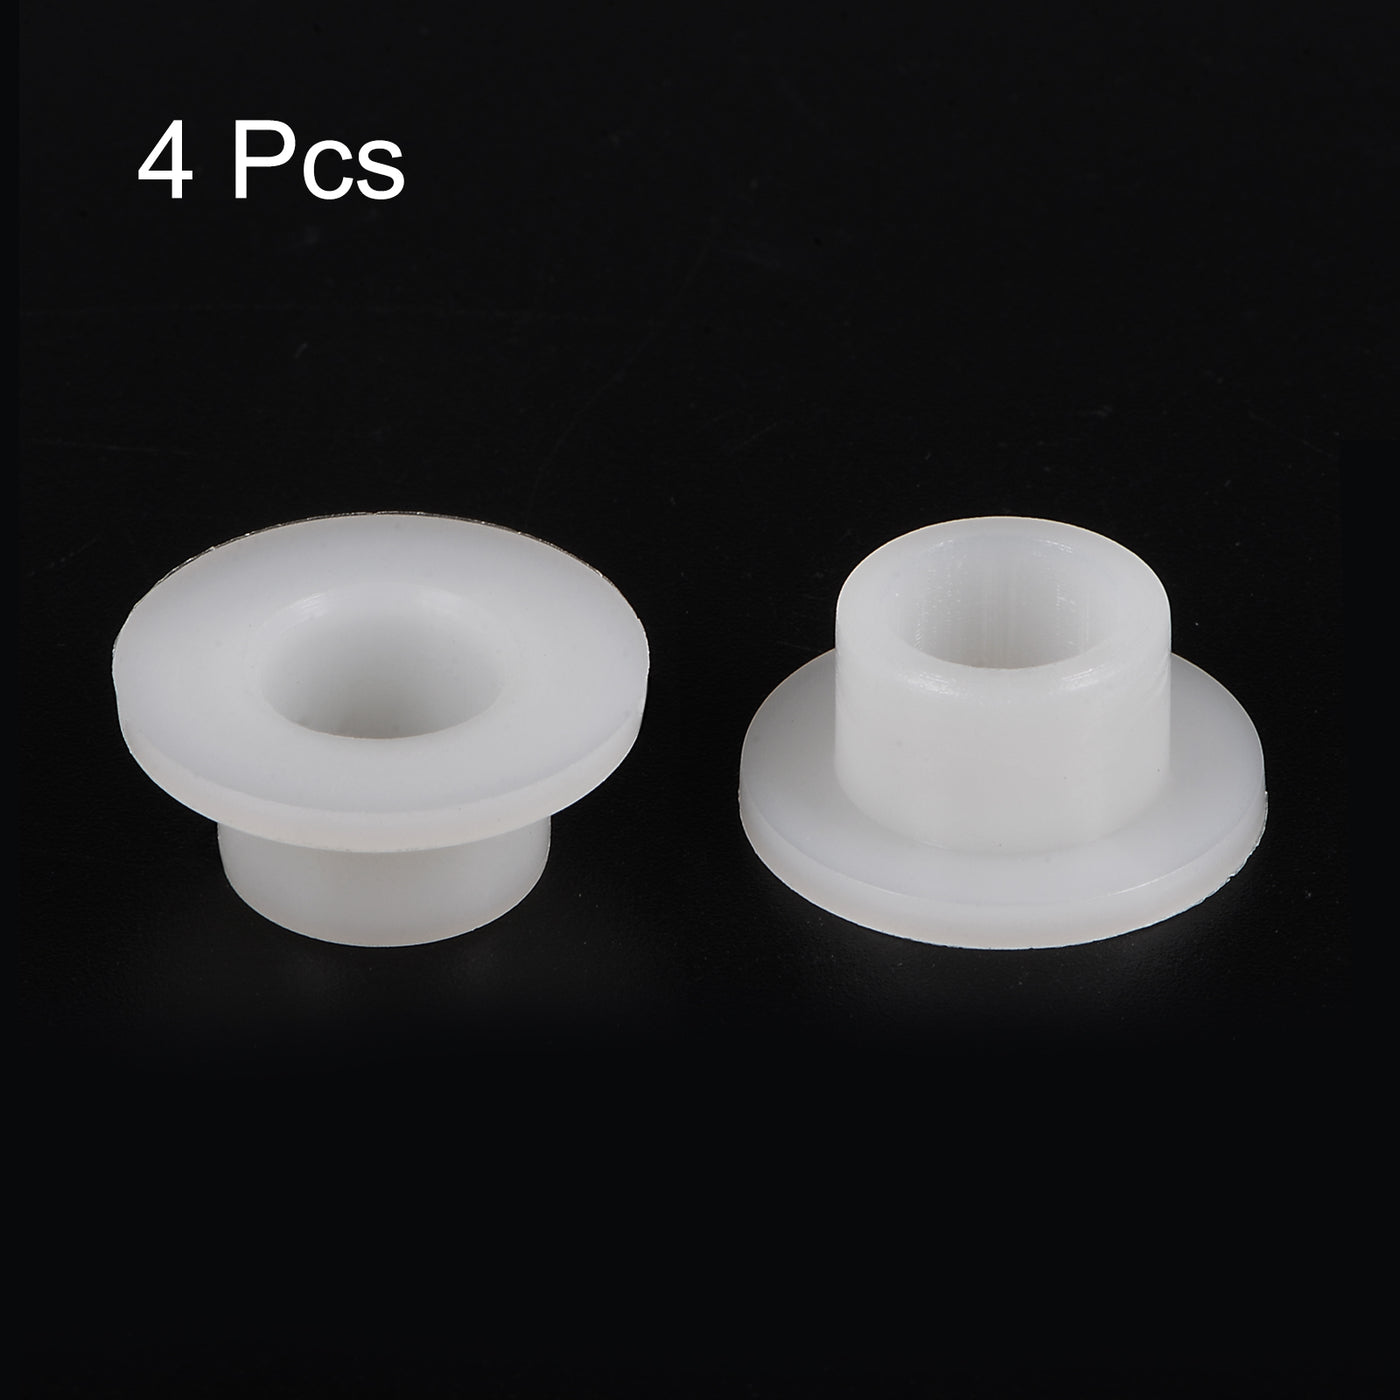 uxcell Uxcell 4pcs Flanged Sleeve Bearings 10.1mm ID 14mm OD 10mm Length Nylon Bushings, White